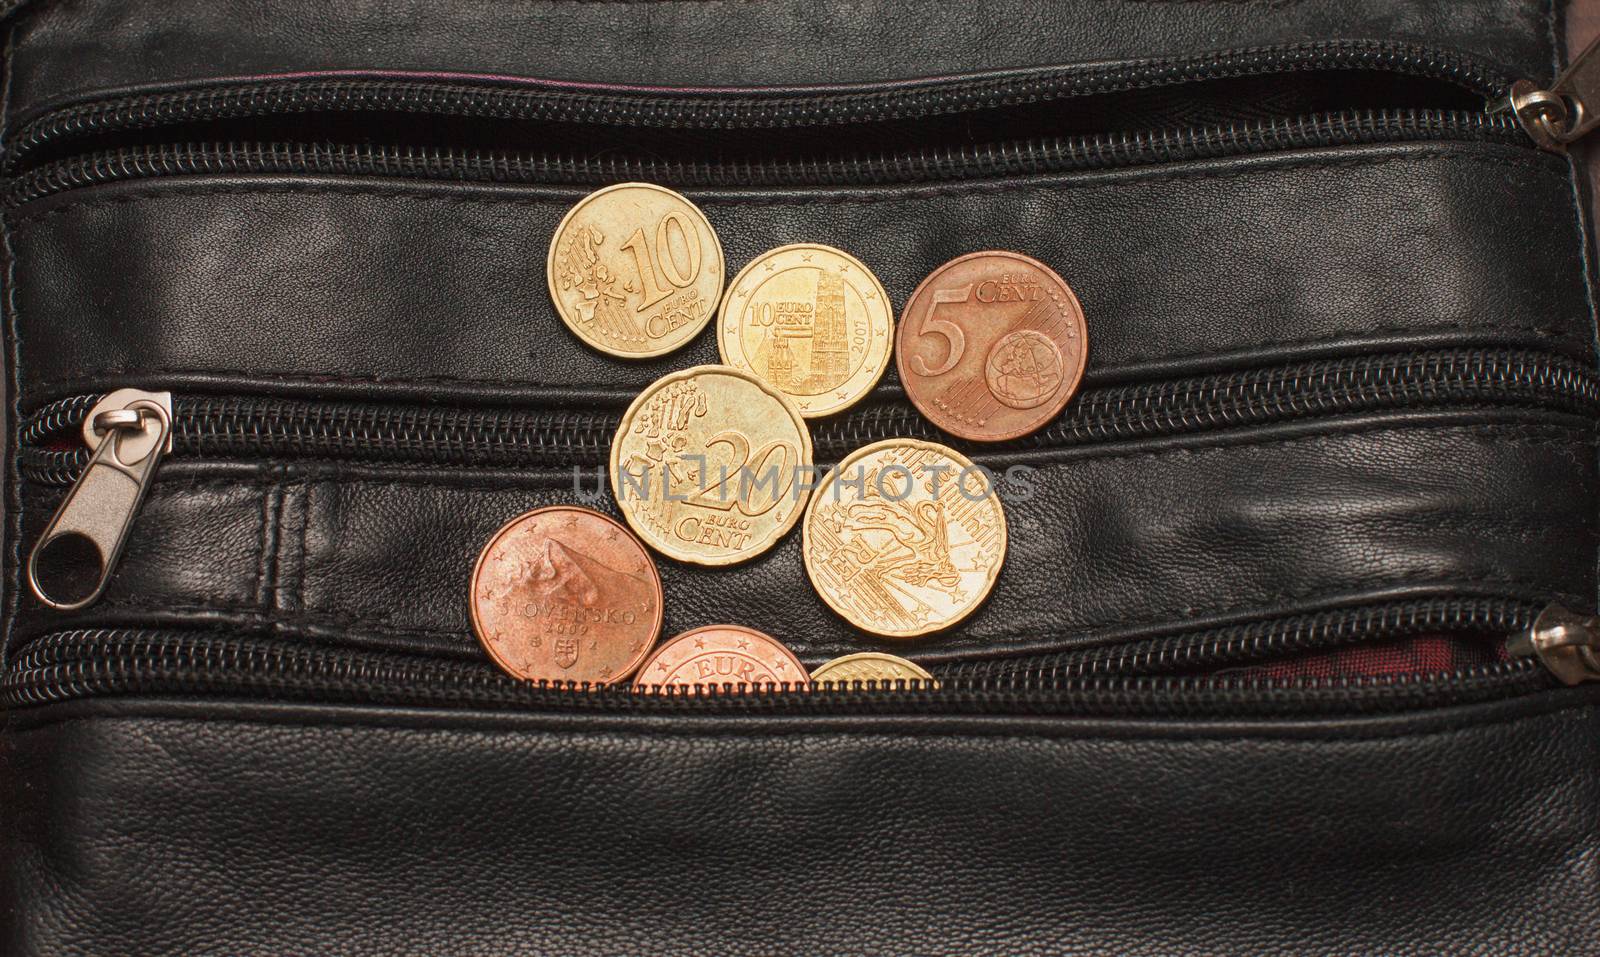 euro cents a black purse, currency, money, small